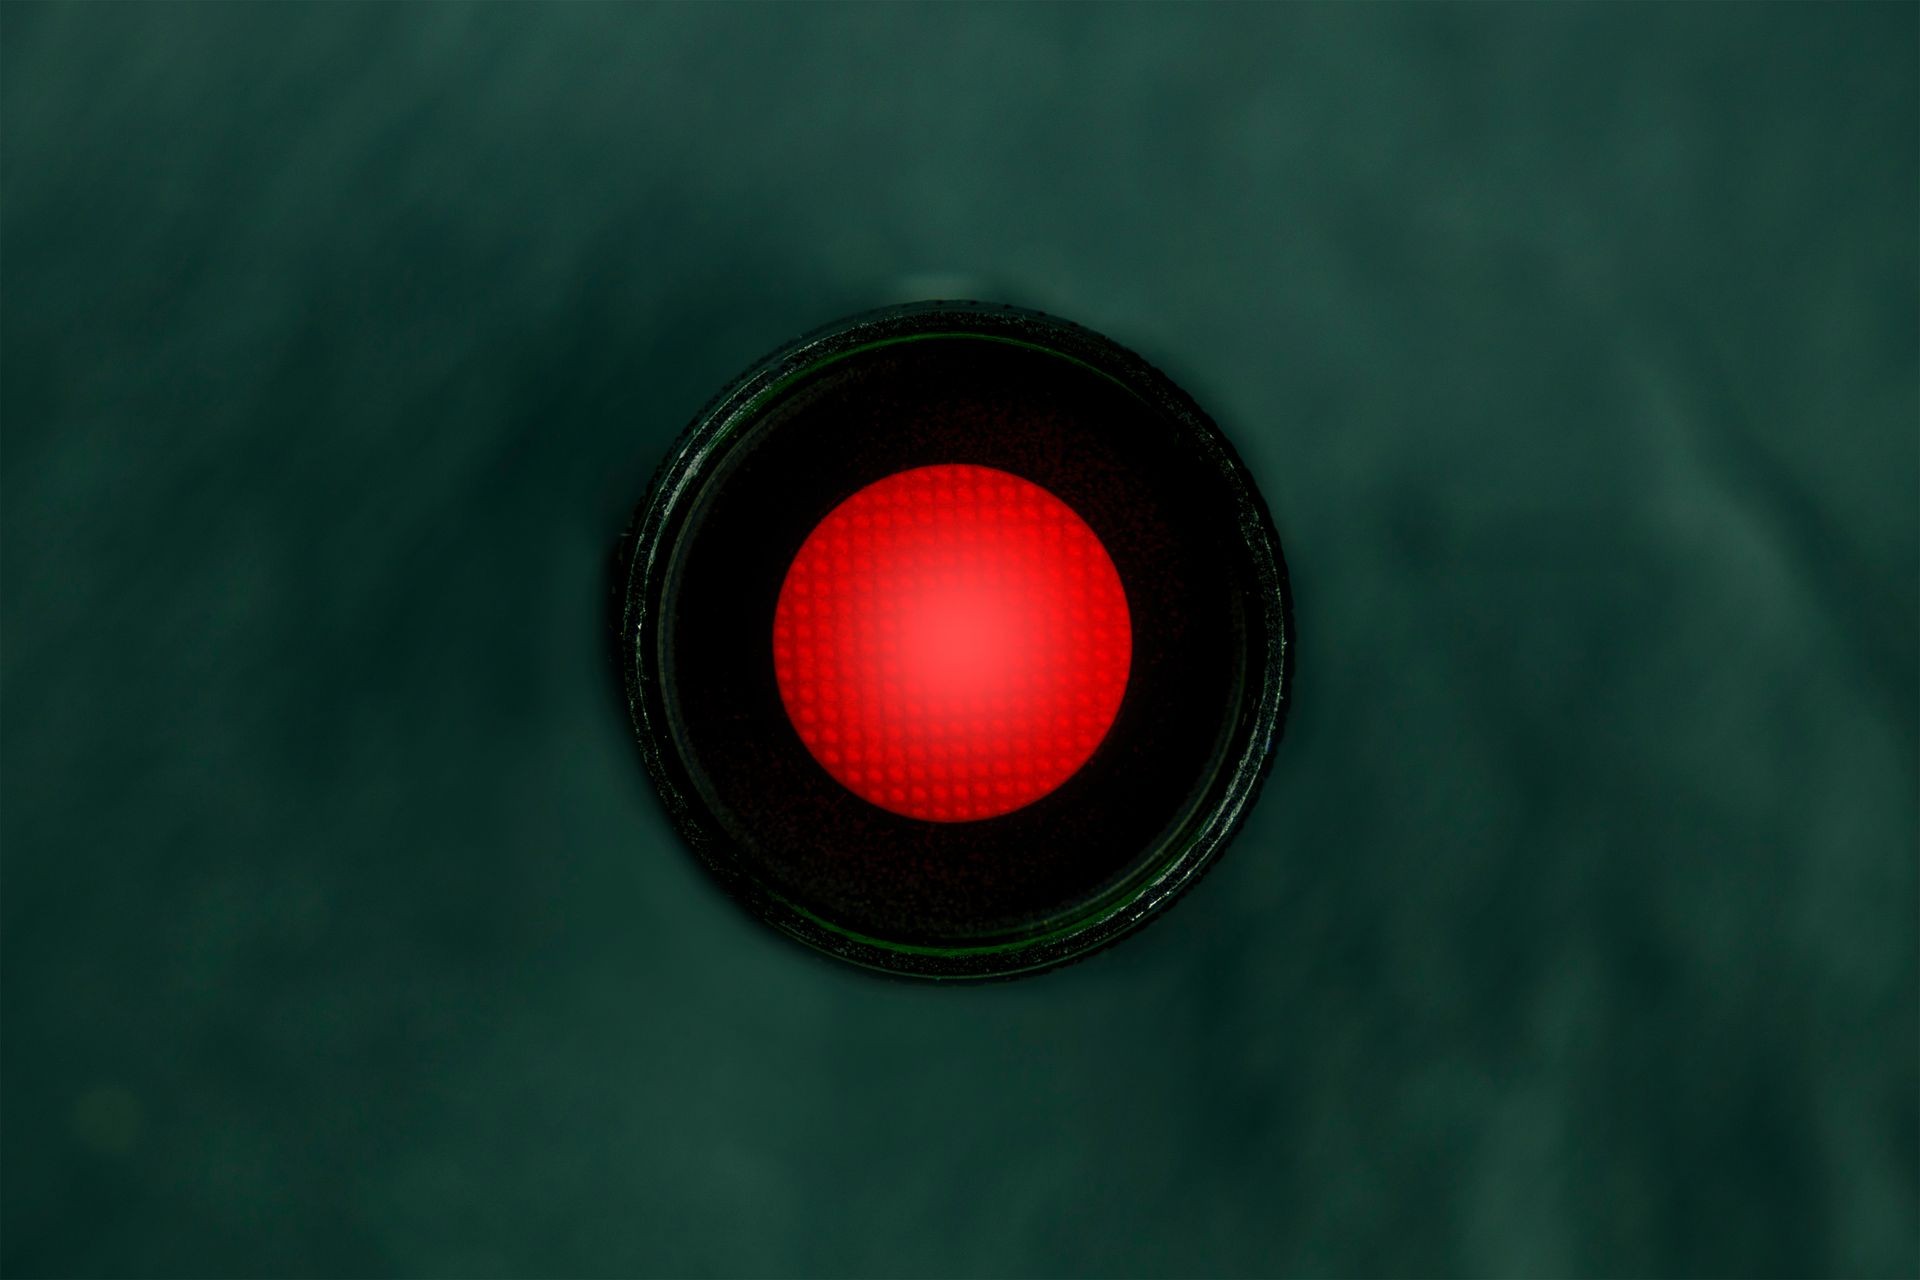 An overhead photo of a vibrant red button, a kill switch on a dark panel with copy space